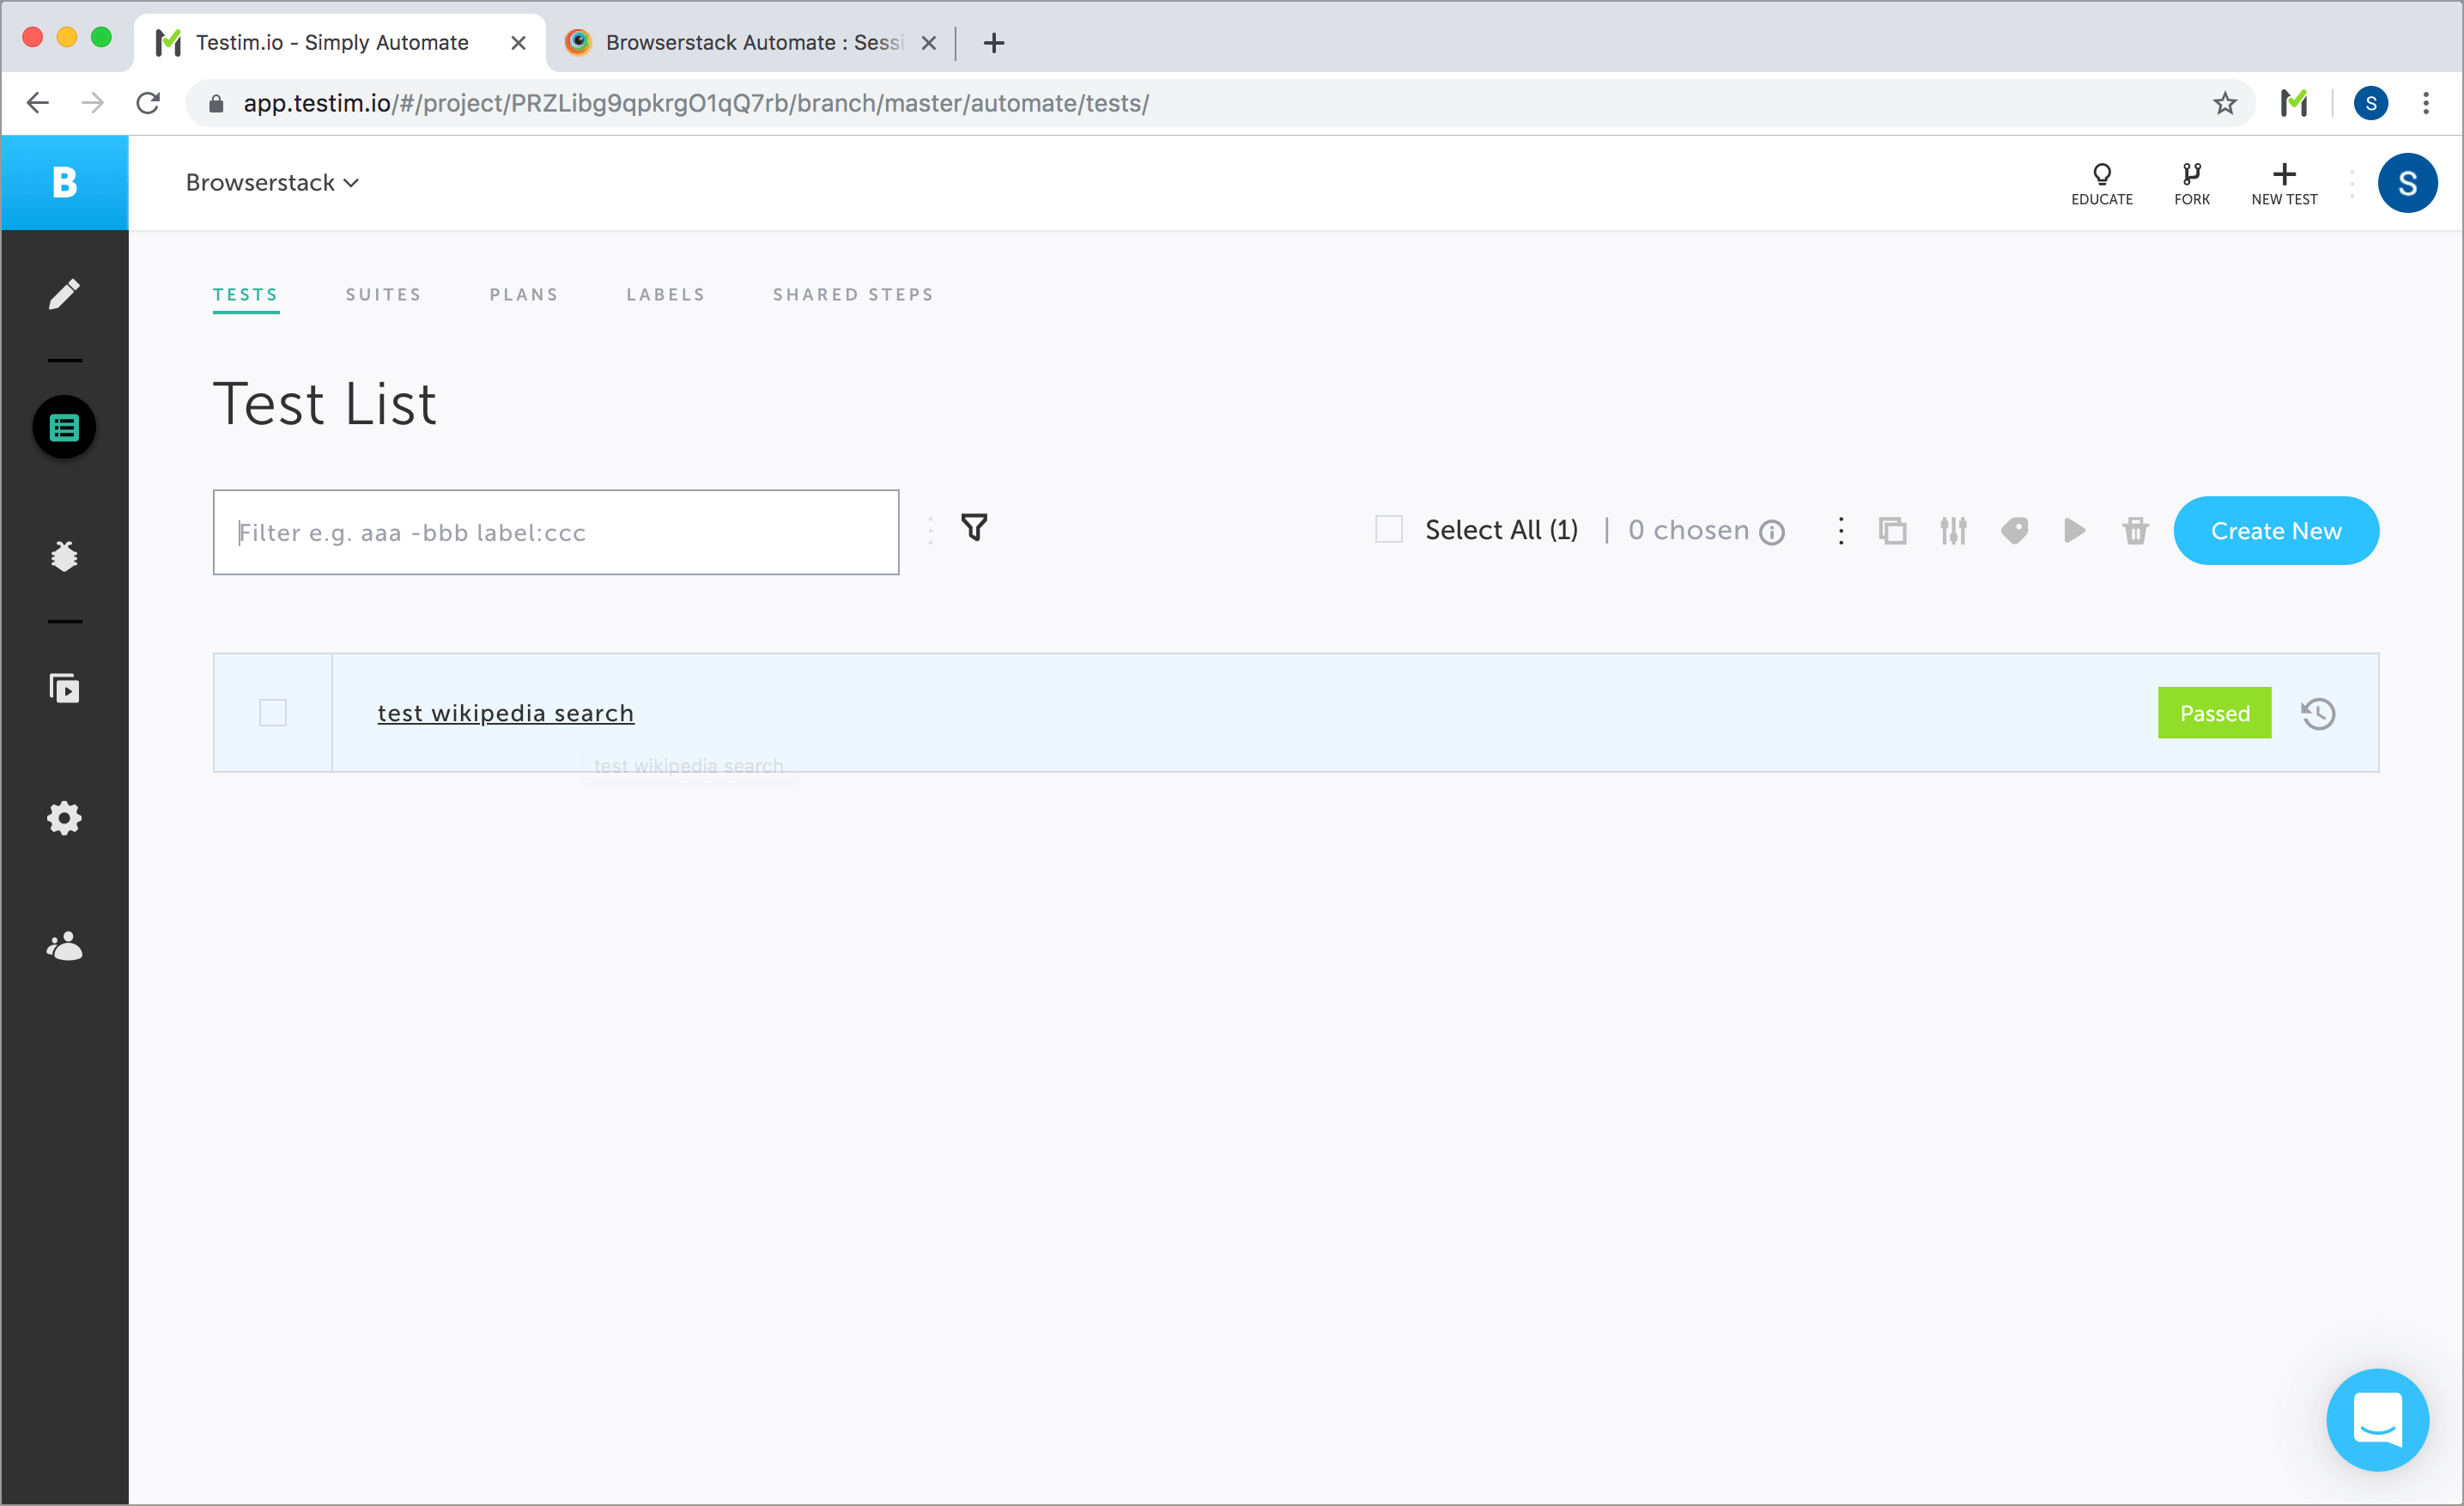 Select test to run on Browserstack